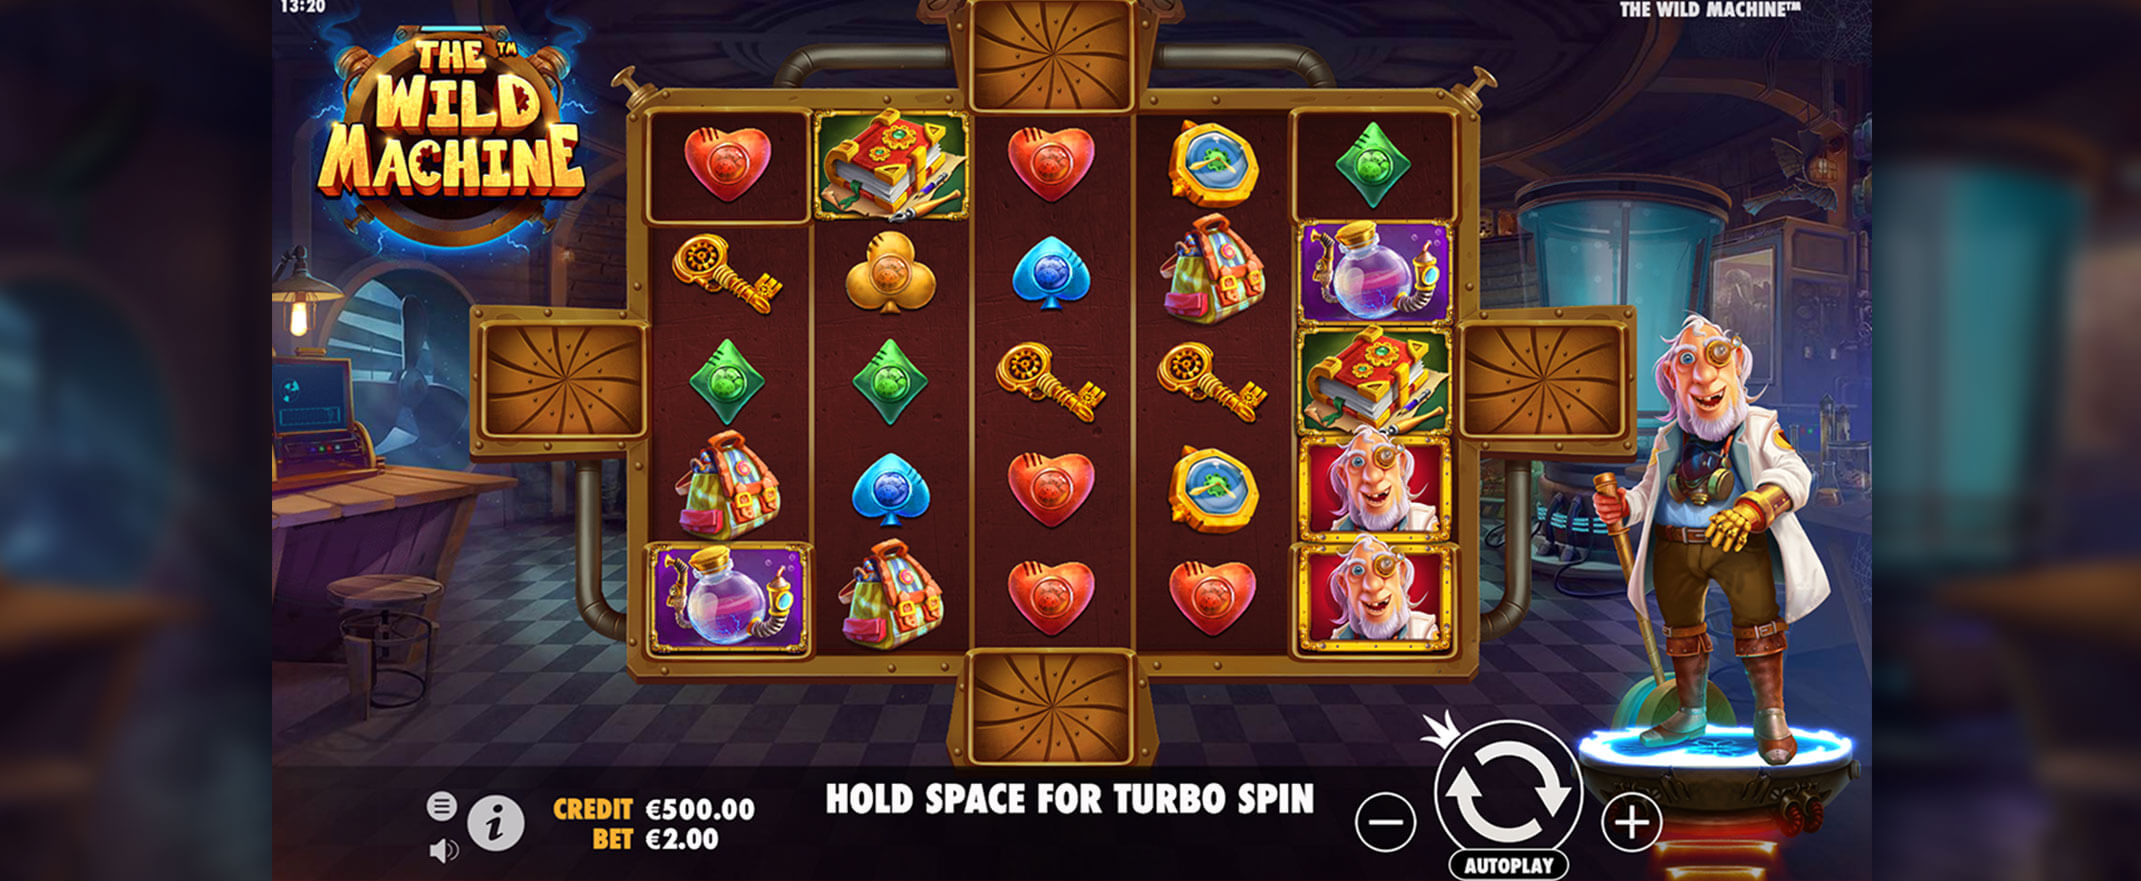 The Wild Machine Slot Review, image of the reels and symbols